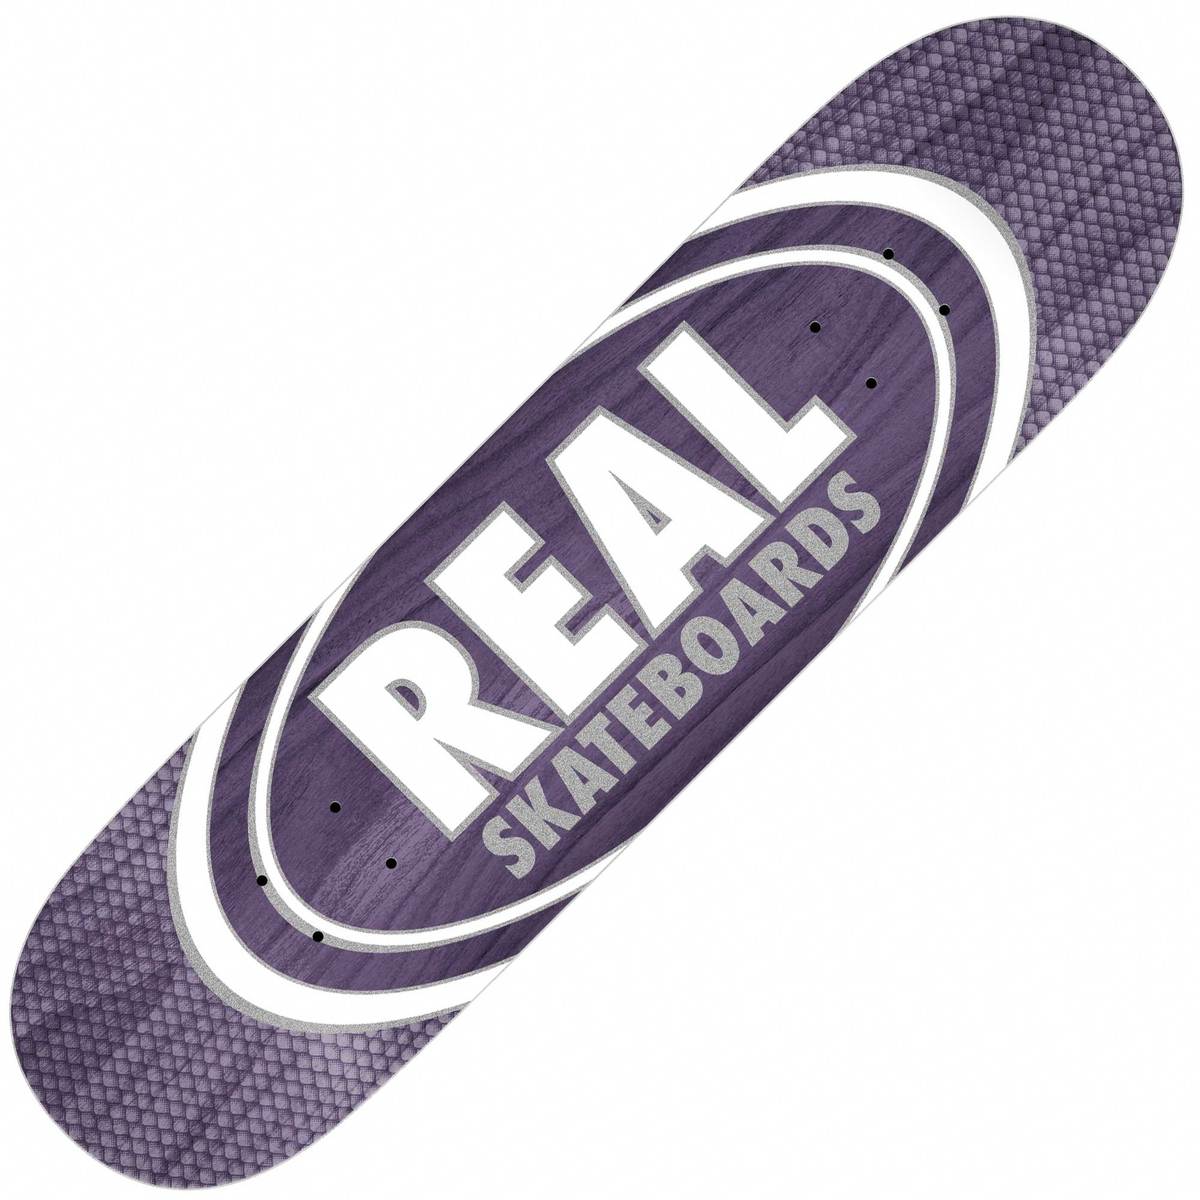 Real Oval Pearl Patterns Slick 8.25